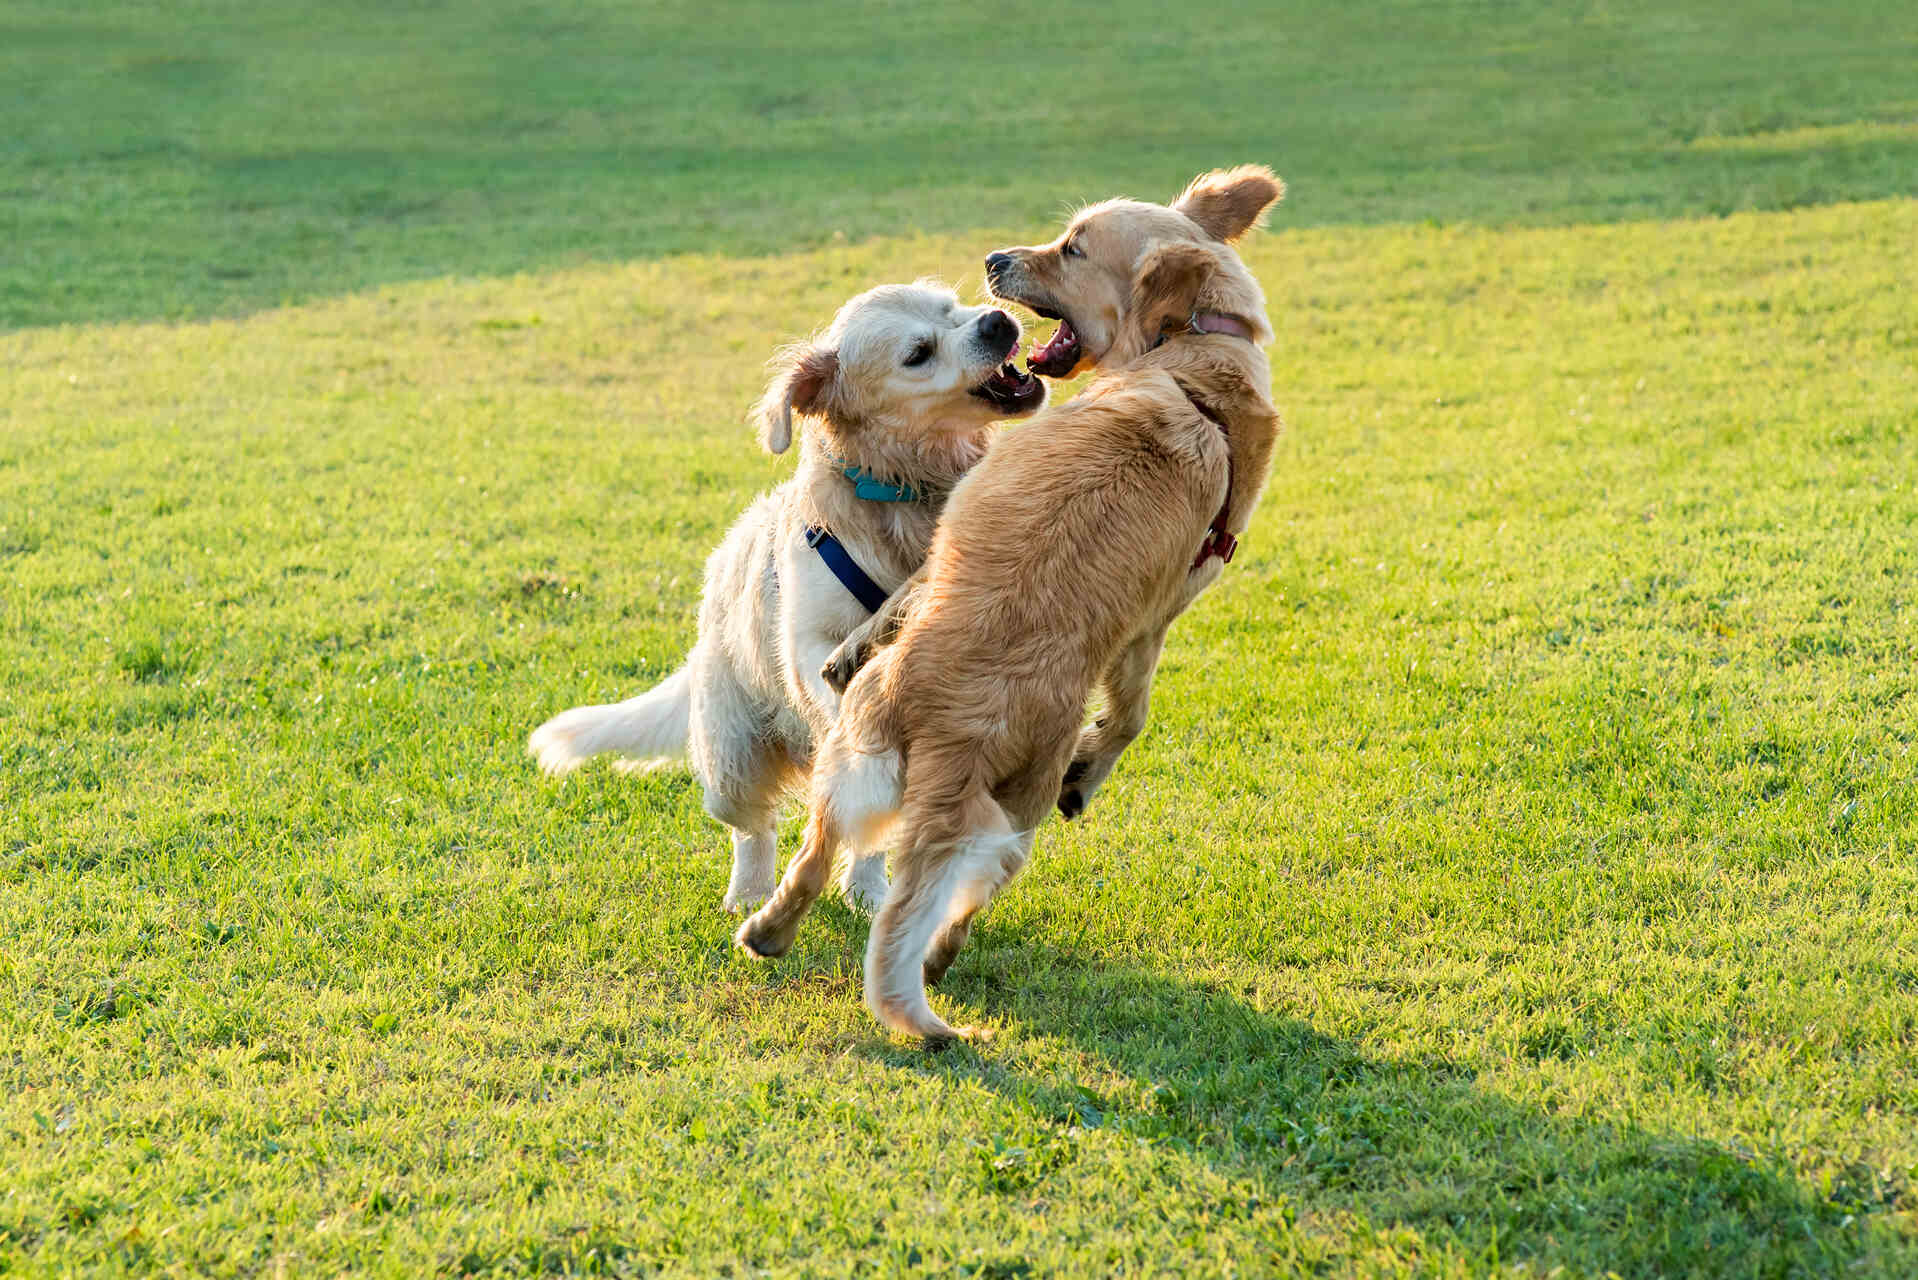 Two dogs playing in a lawn